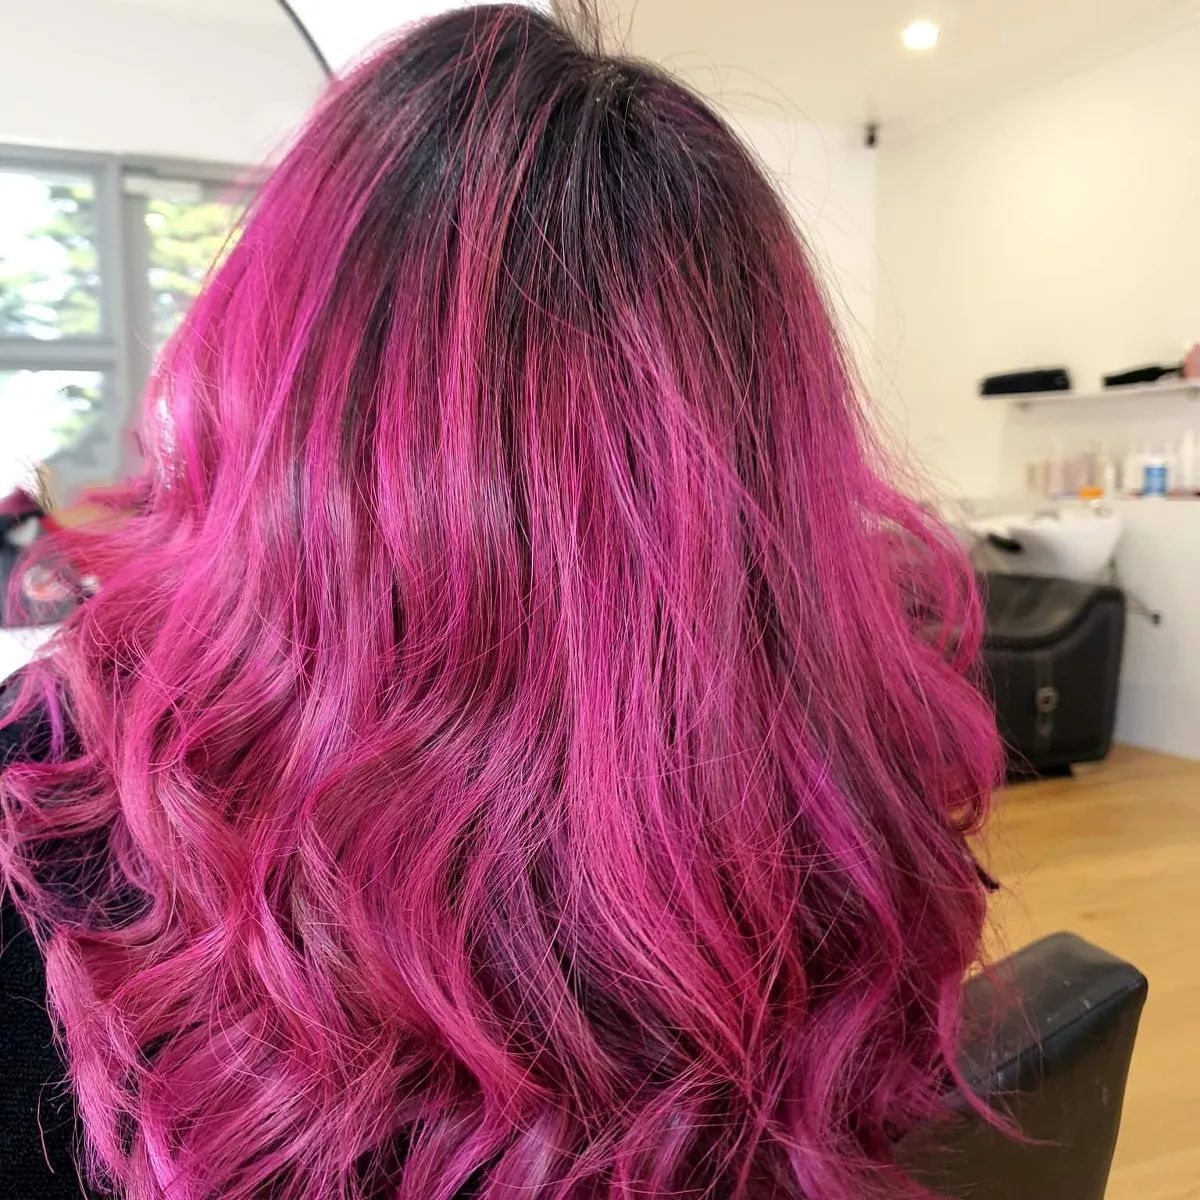 pink ombre hair color 139 Ombre pink hair blonde | Pastel pink ombre hair | Pink balayage Hair Pink Ombre Hair Color for Women